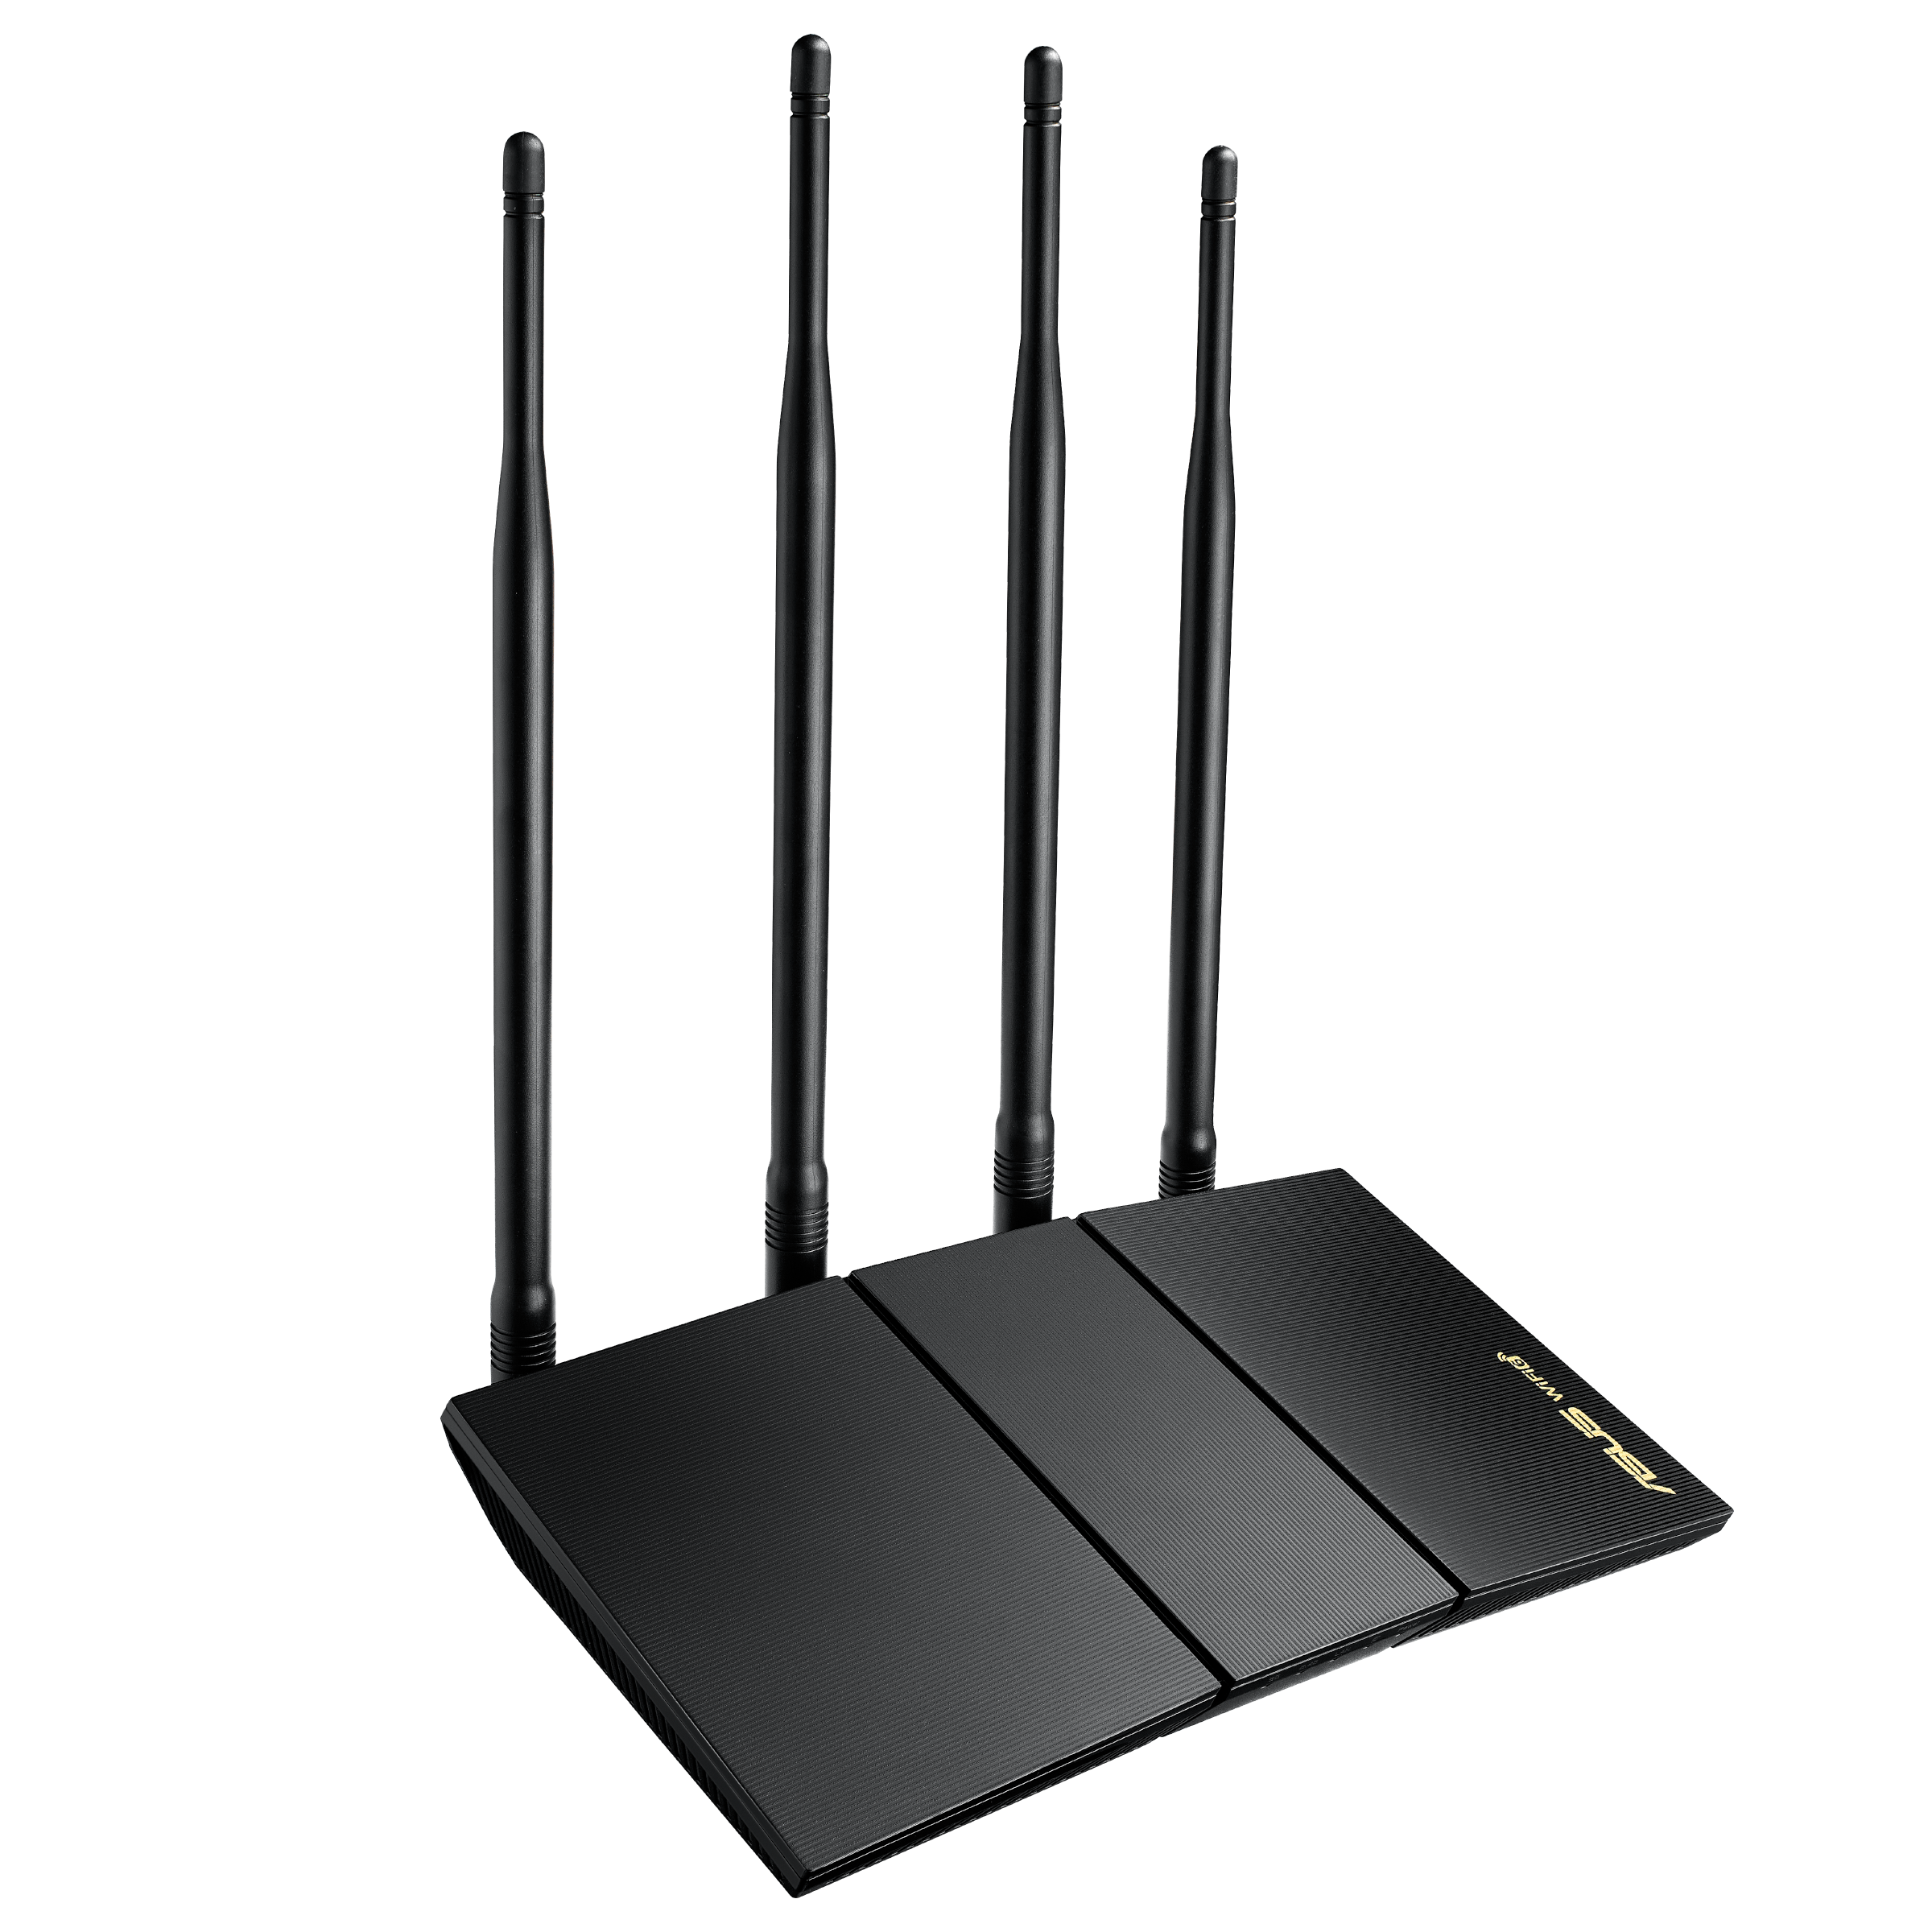 ASUS AX1800 Dual Band WiFi 6 (802.11ax) Router Supporting MU-MIMO